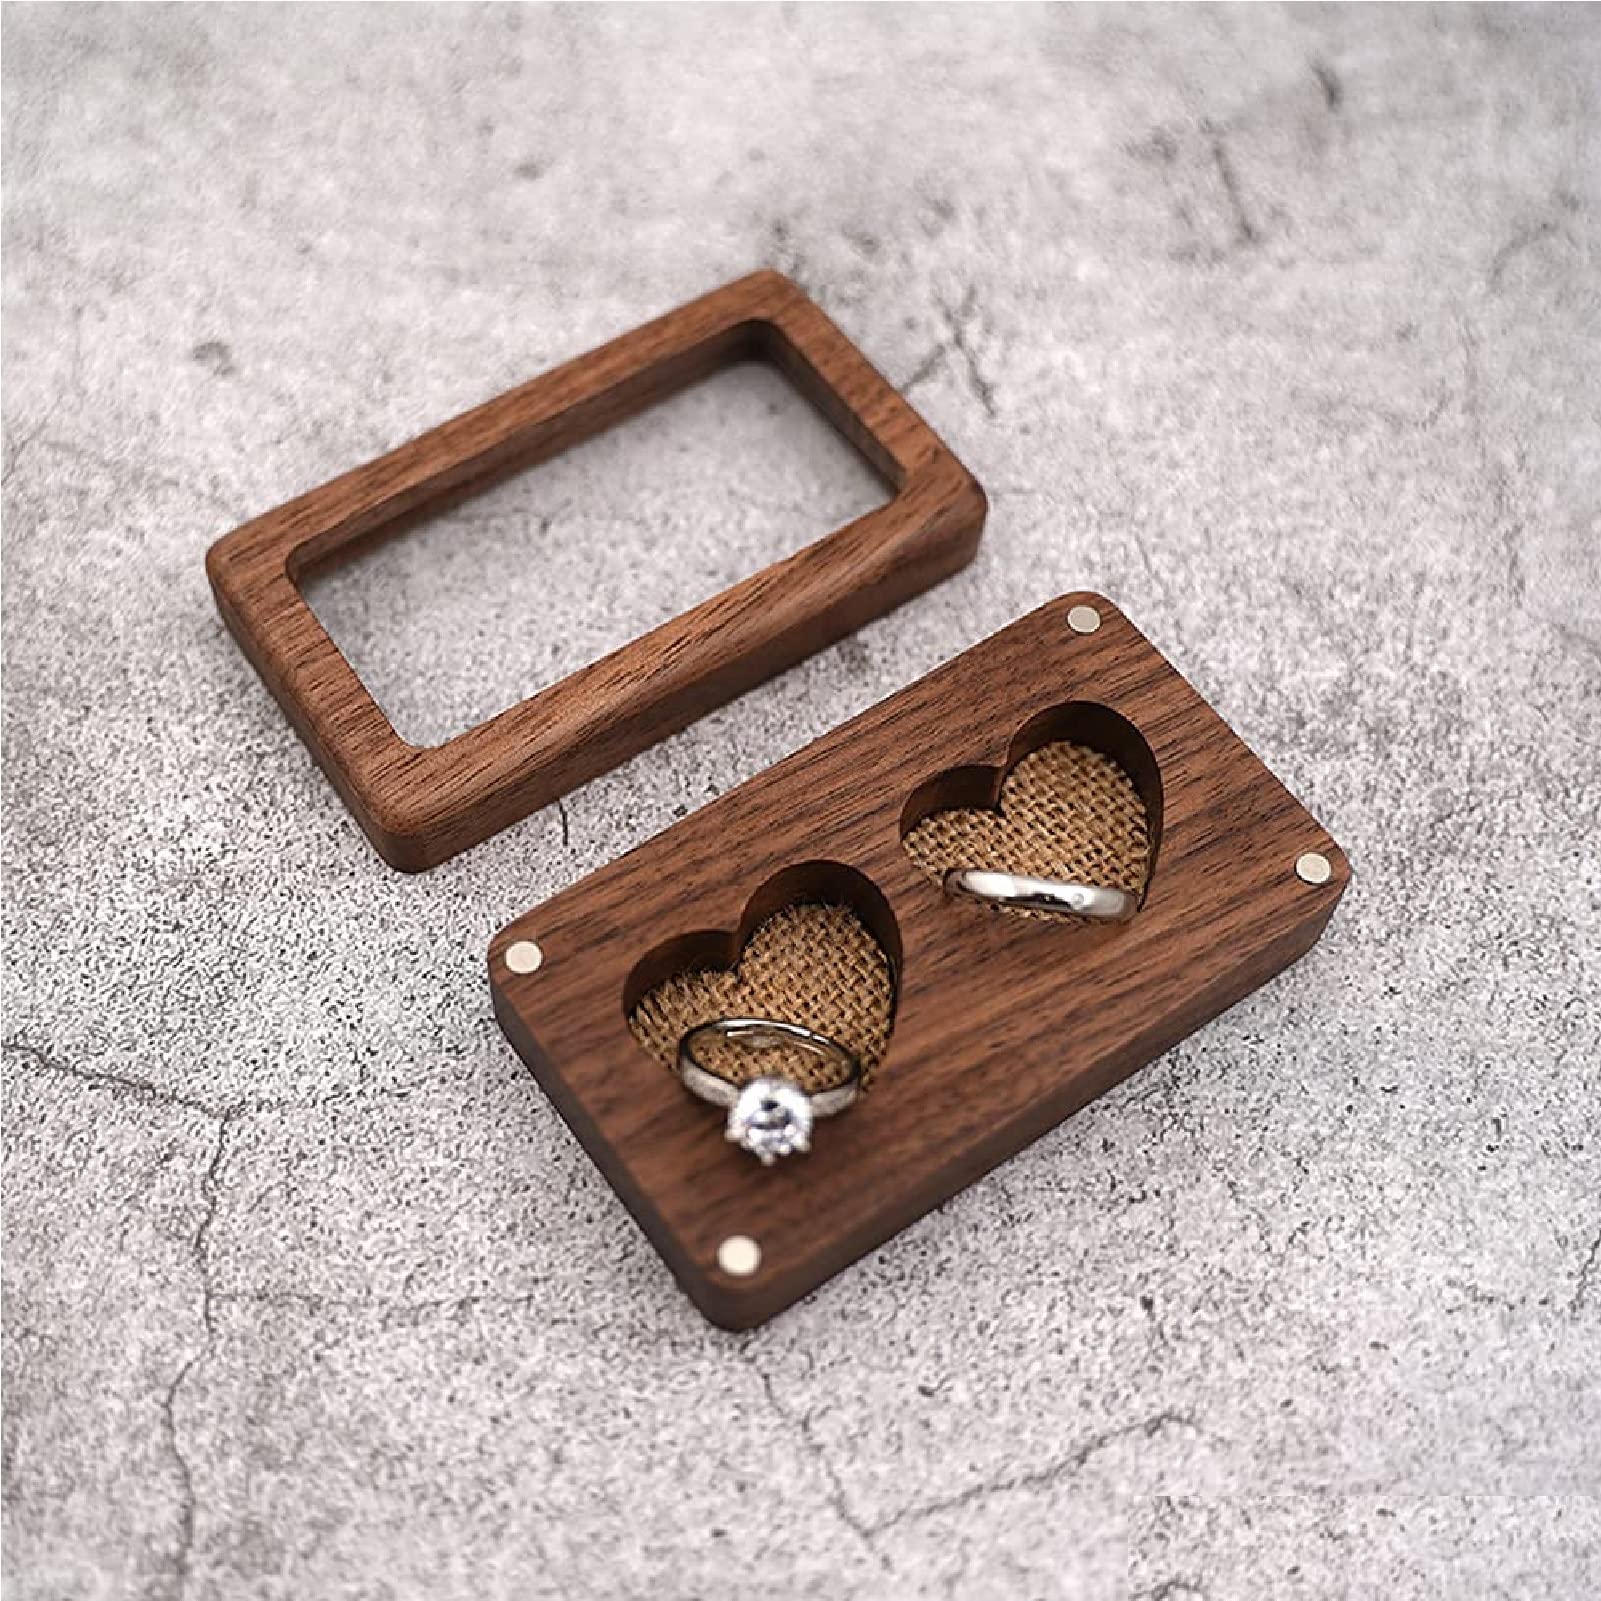 Kisbeibi Wooden Ring Box, Jewelry Box Ring Holder Case Ring Box with Cushion,Gift Holder Jewelry Storage Box for Proposal Wedding Engagement Birthday(Wooden)